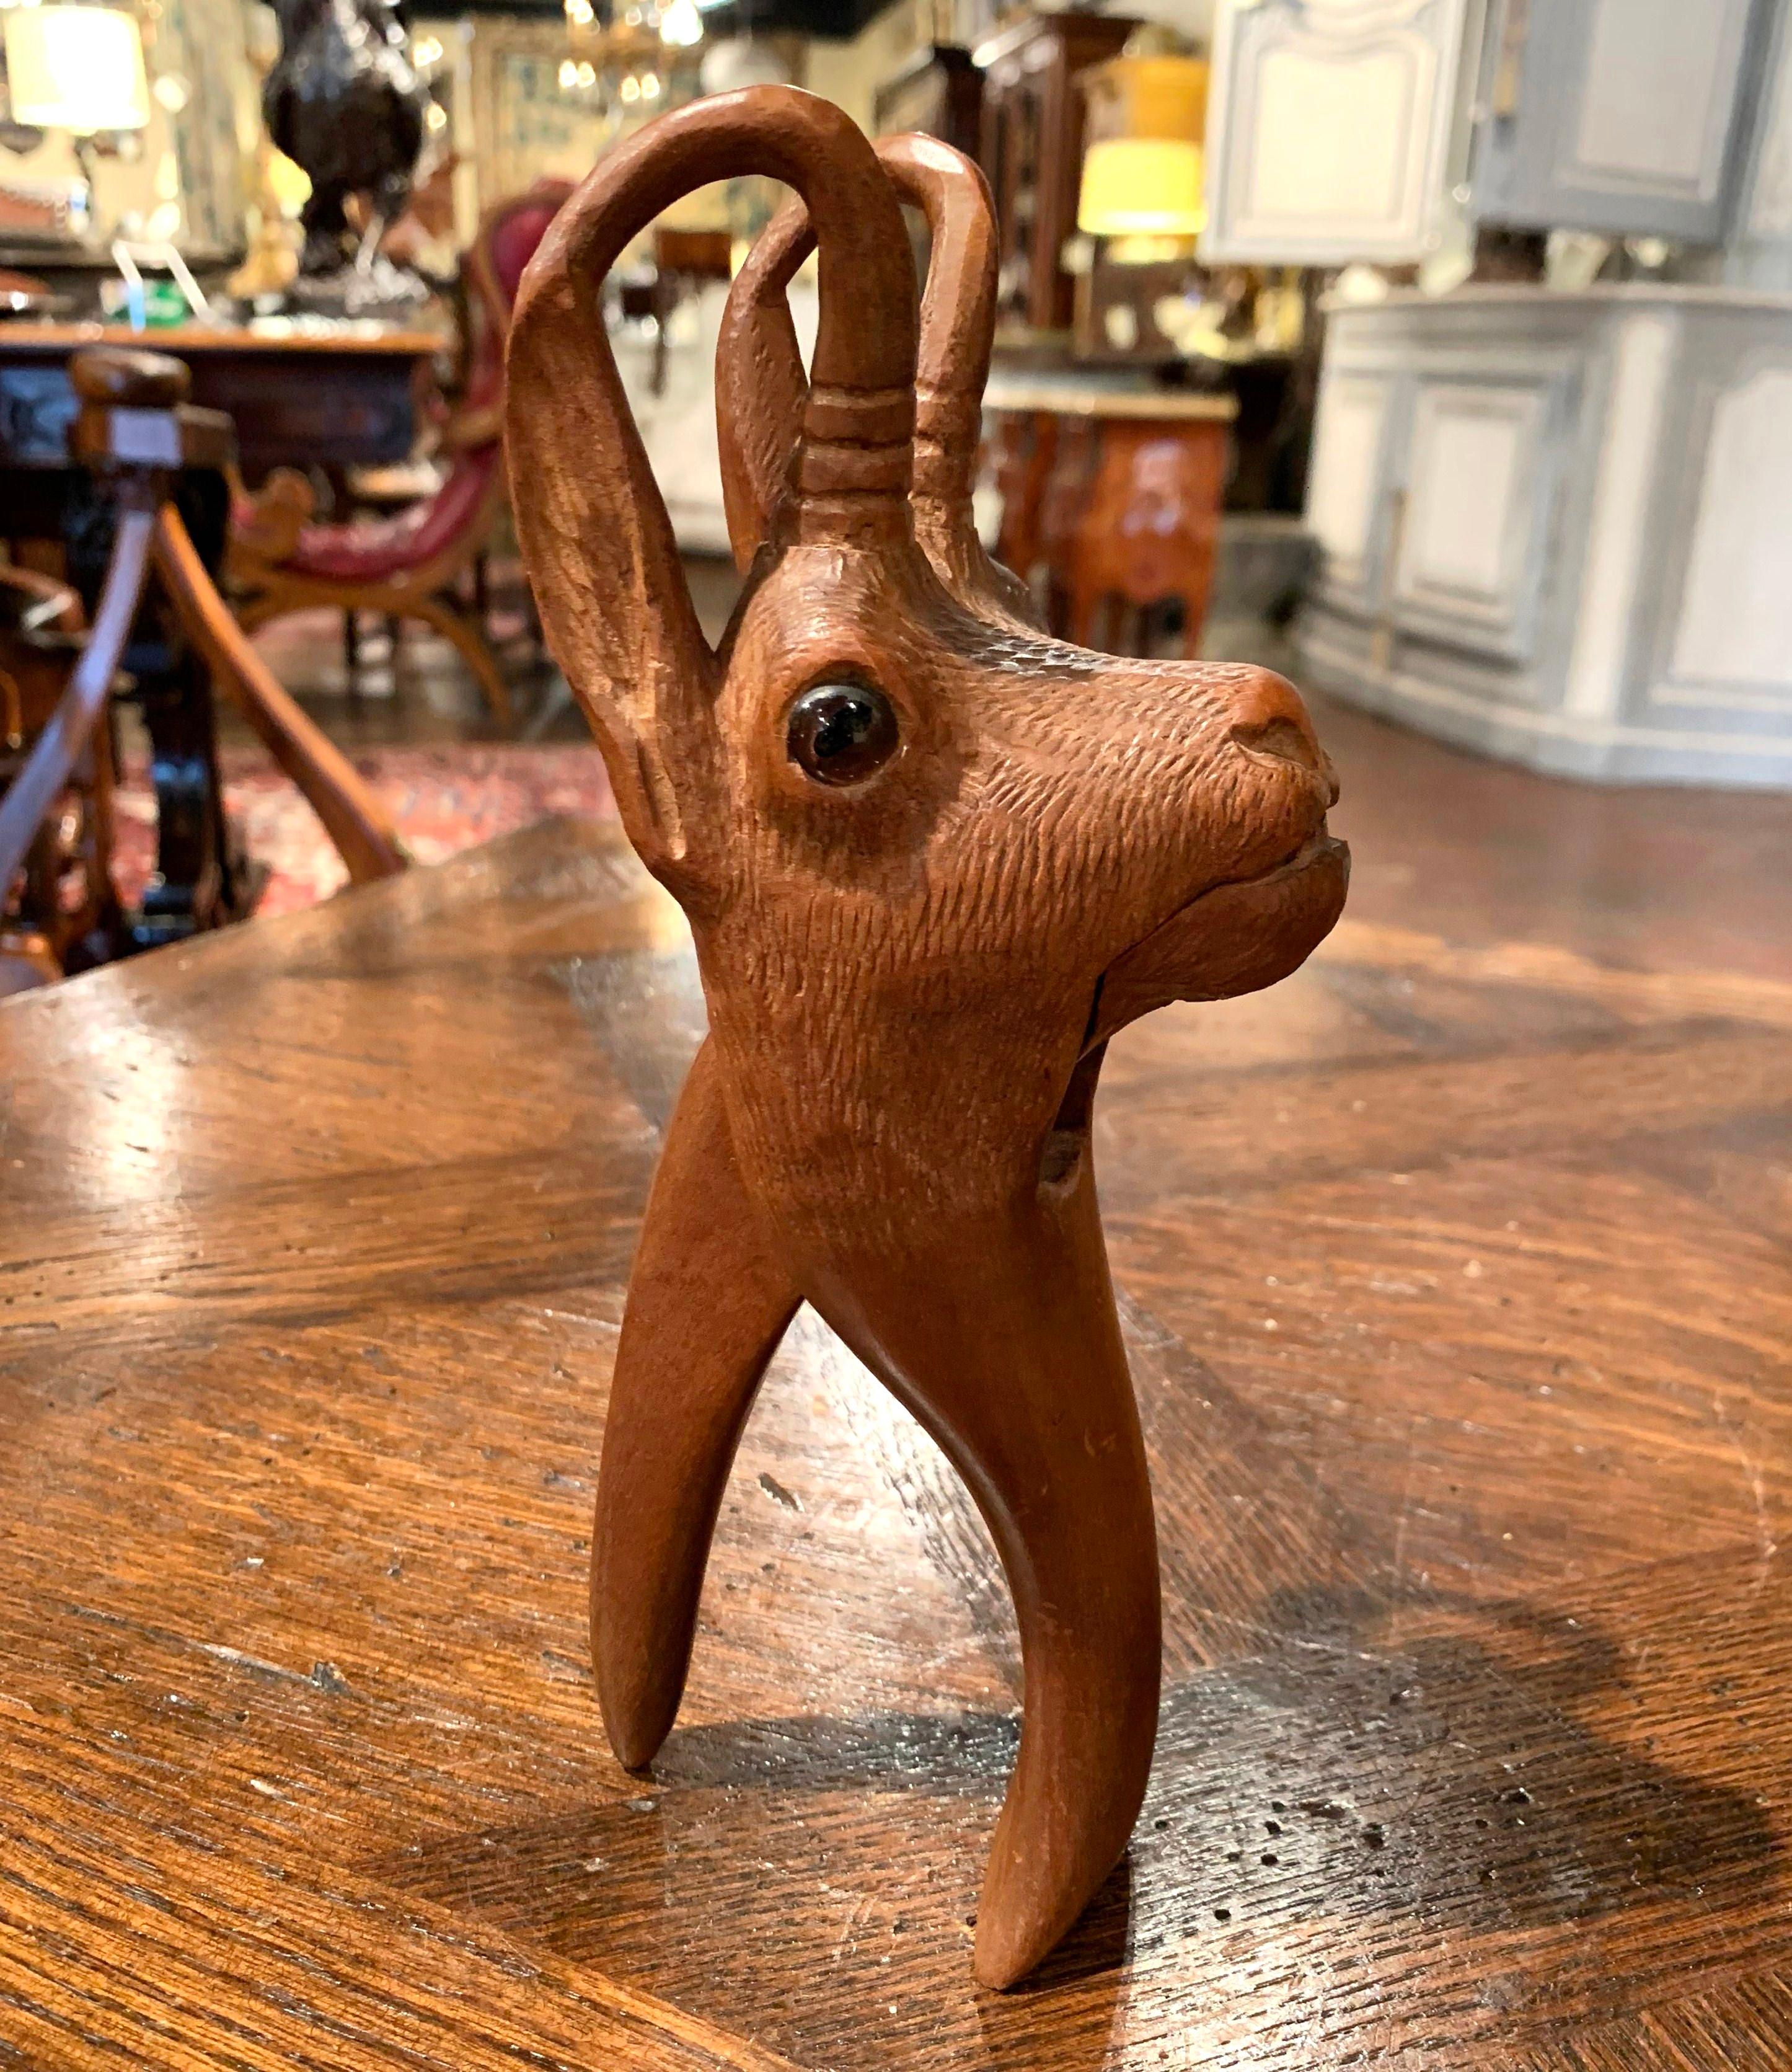 This interesting fruitwood nutcracker was crafted in France, circa 1880; made of walnut, the kitchen utensil features a carved deer head sculpture with horns and embellished with glass eyes. The functional and practical compound lever is in